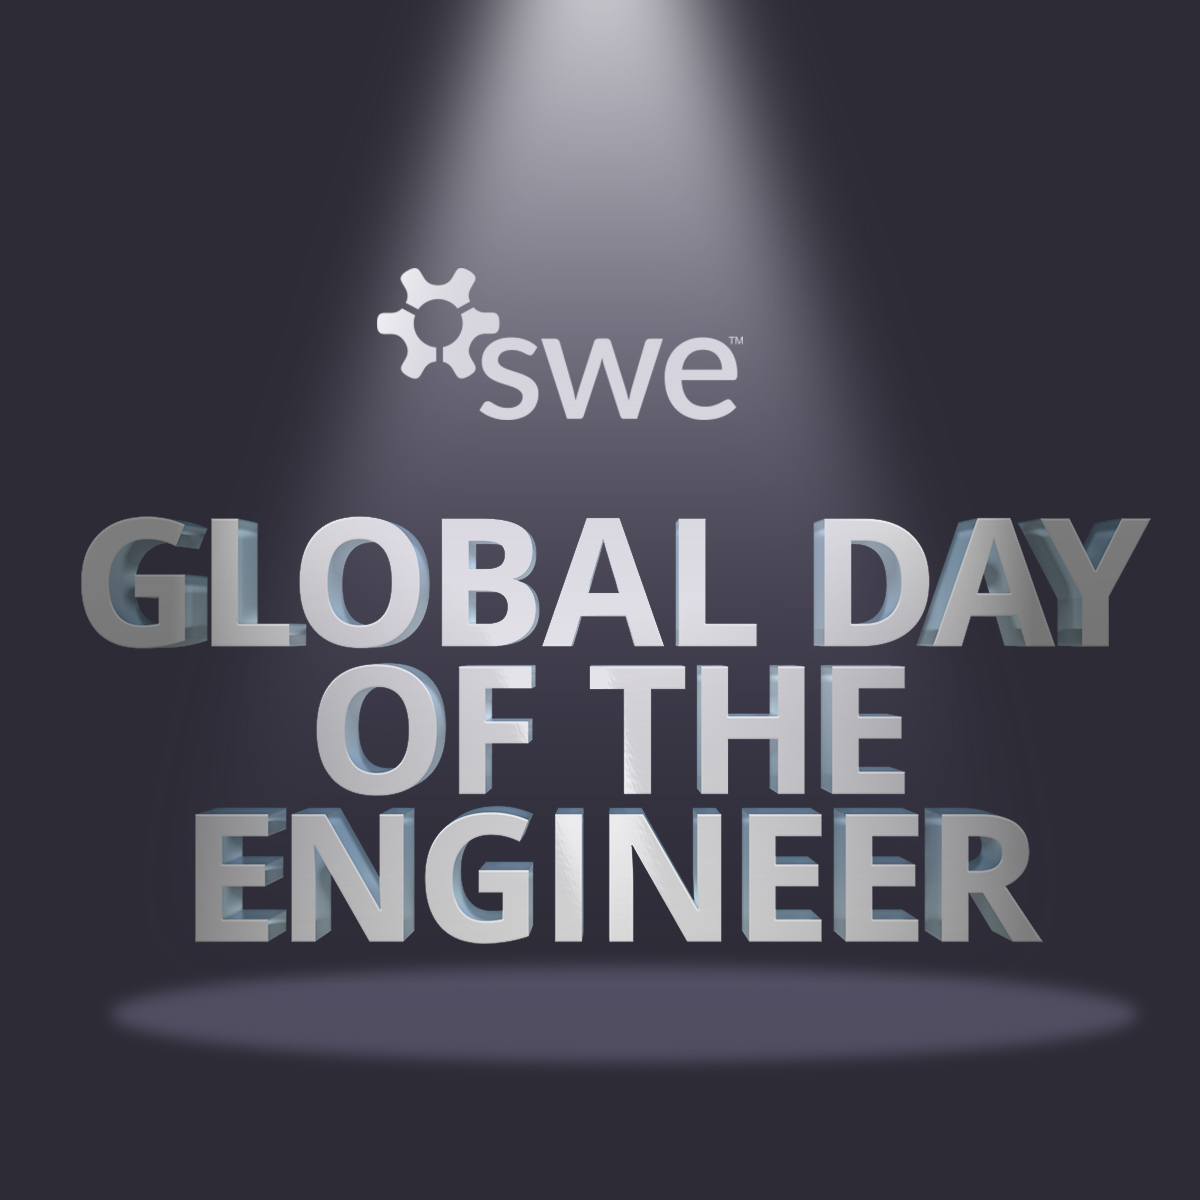 Celebrate the Global Day of the Engineer with SWE All Together